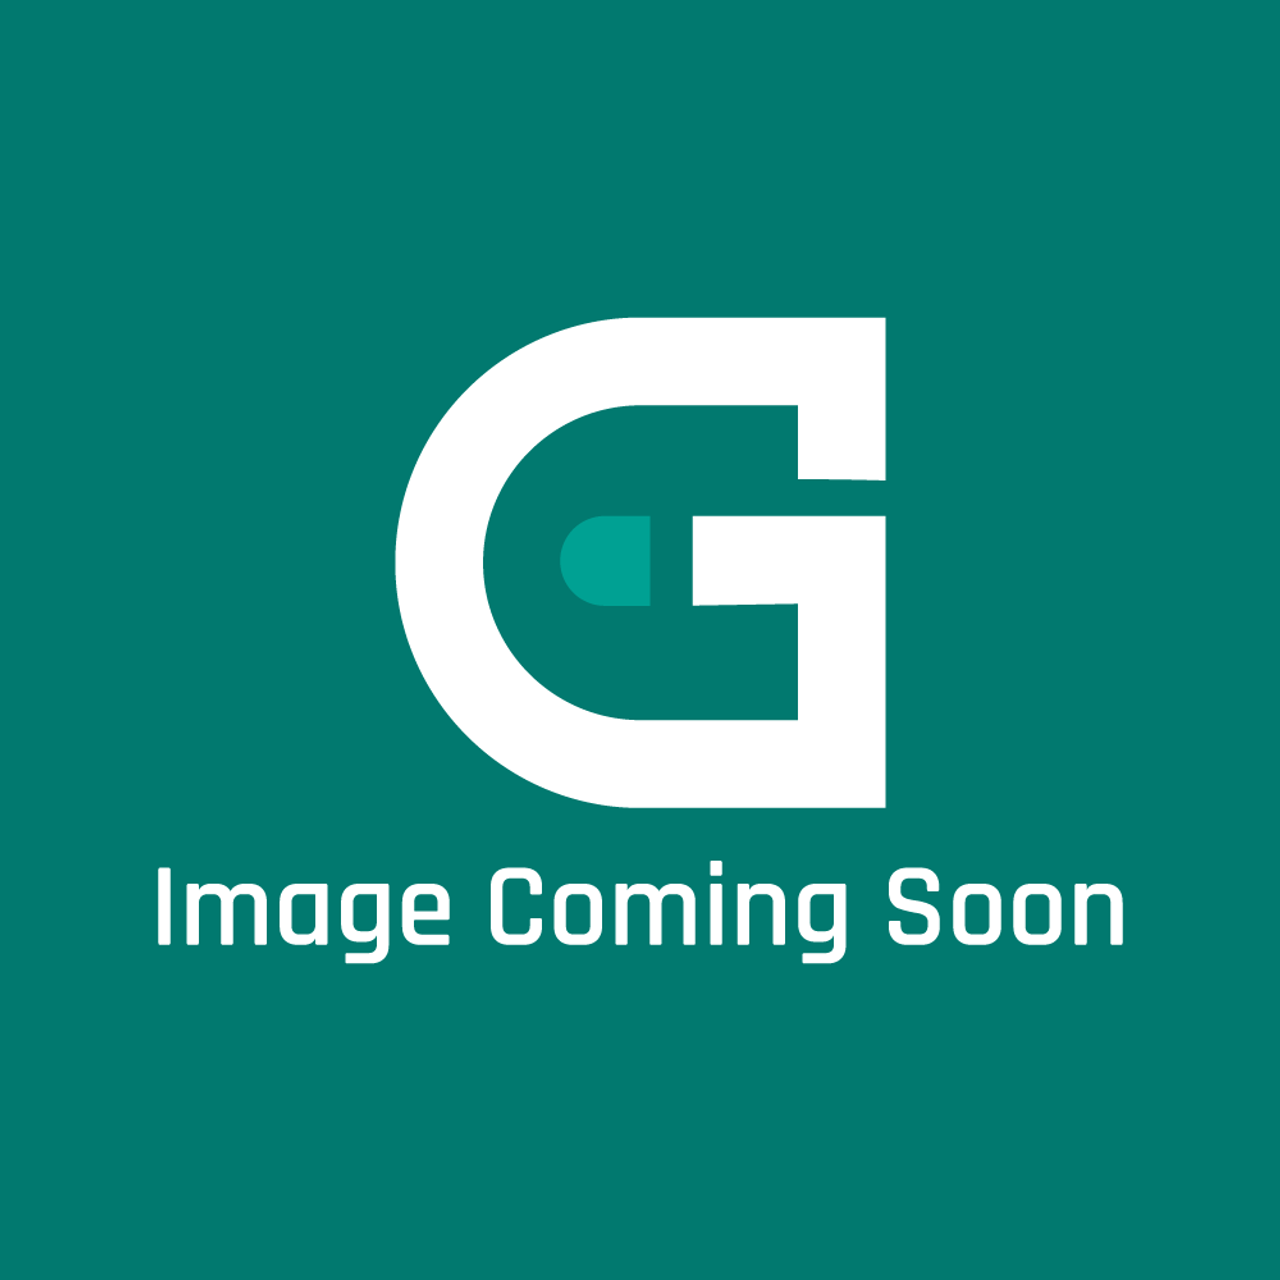 Frigidaire - Electrolux 5304533037 Ice Container - Image Coming Soon!